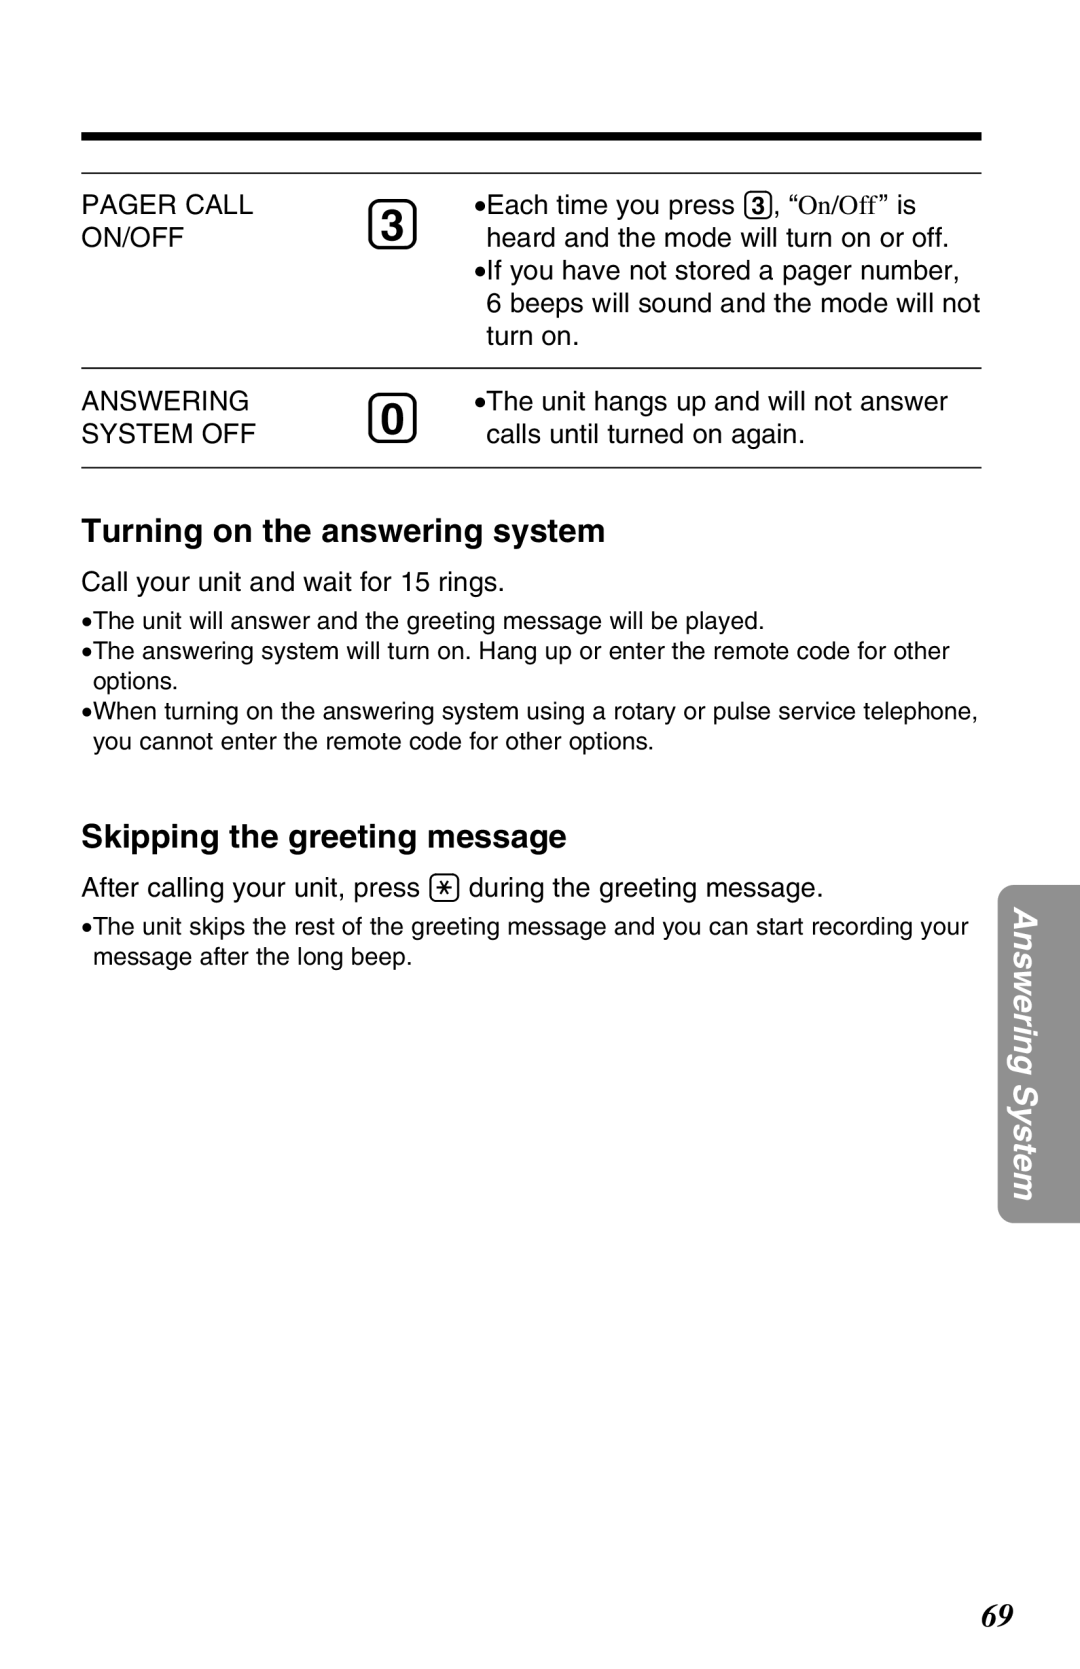 Panasonic KX-TG2670N operating instructions Turning on the answering system, Skipping the greeting message 